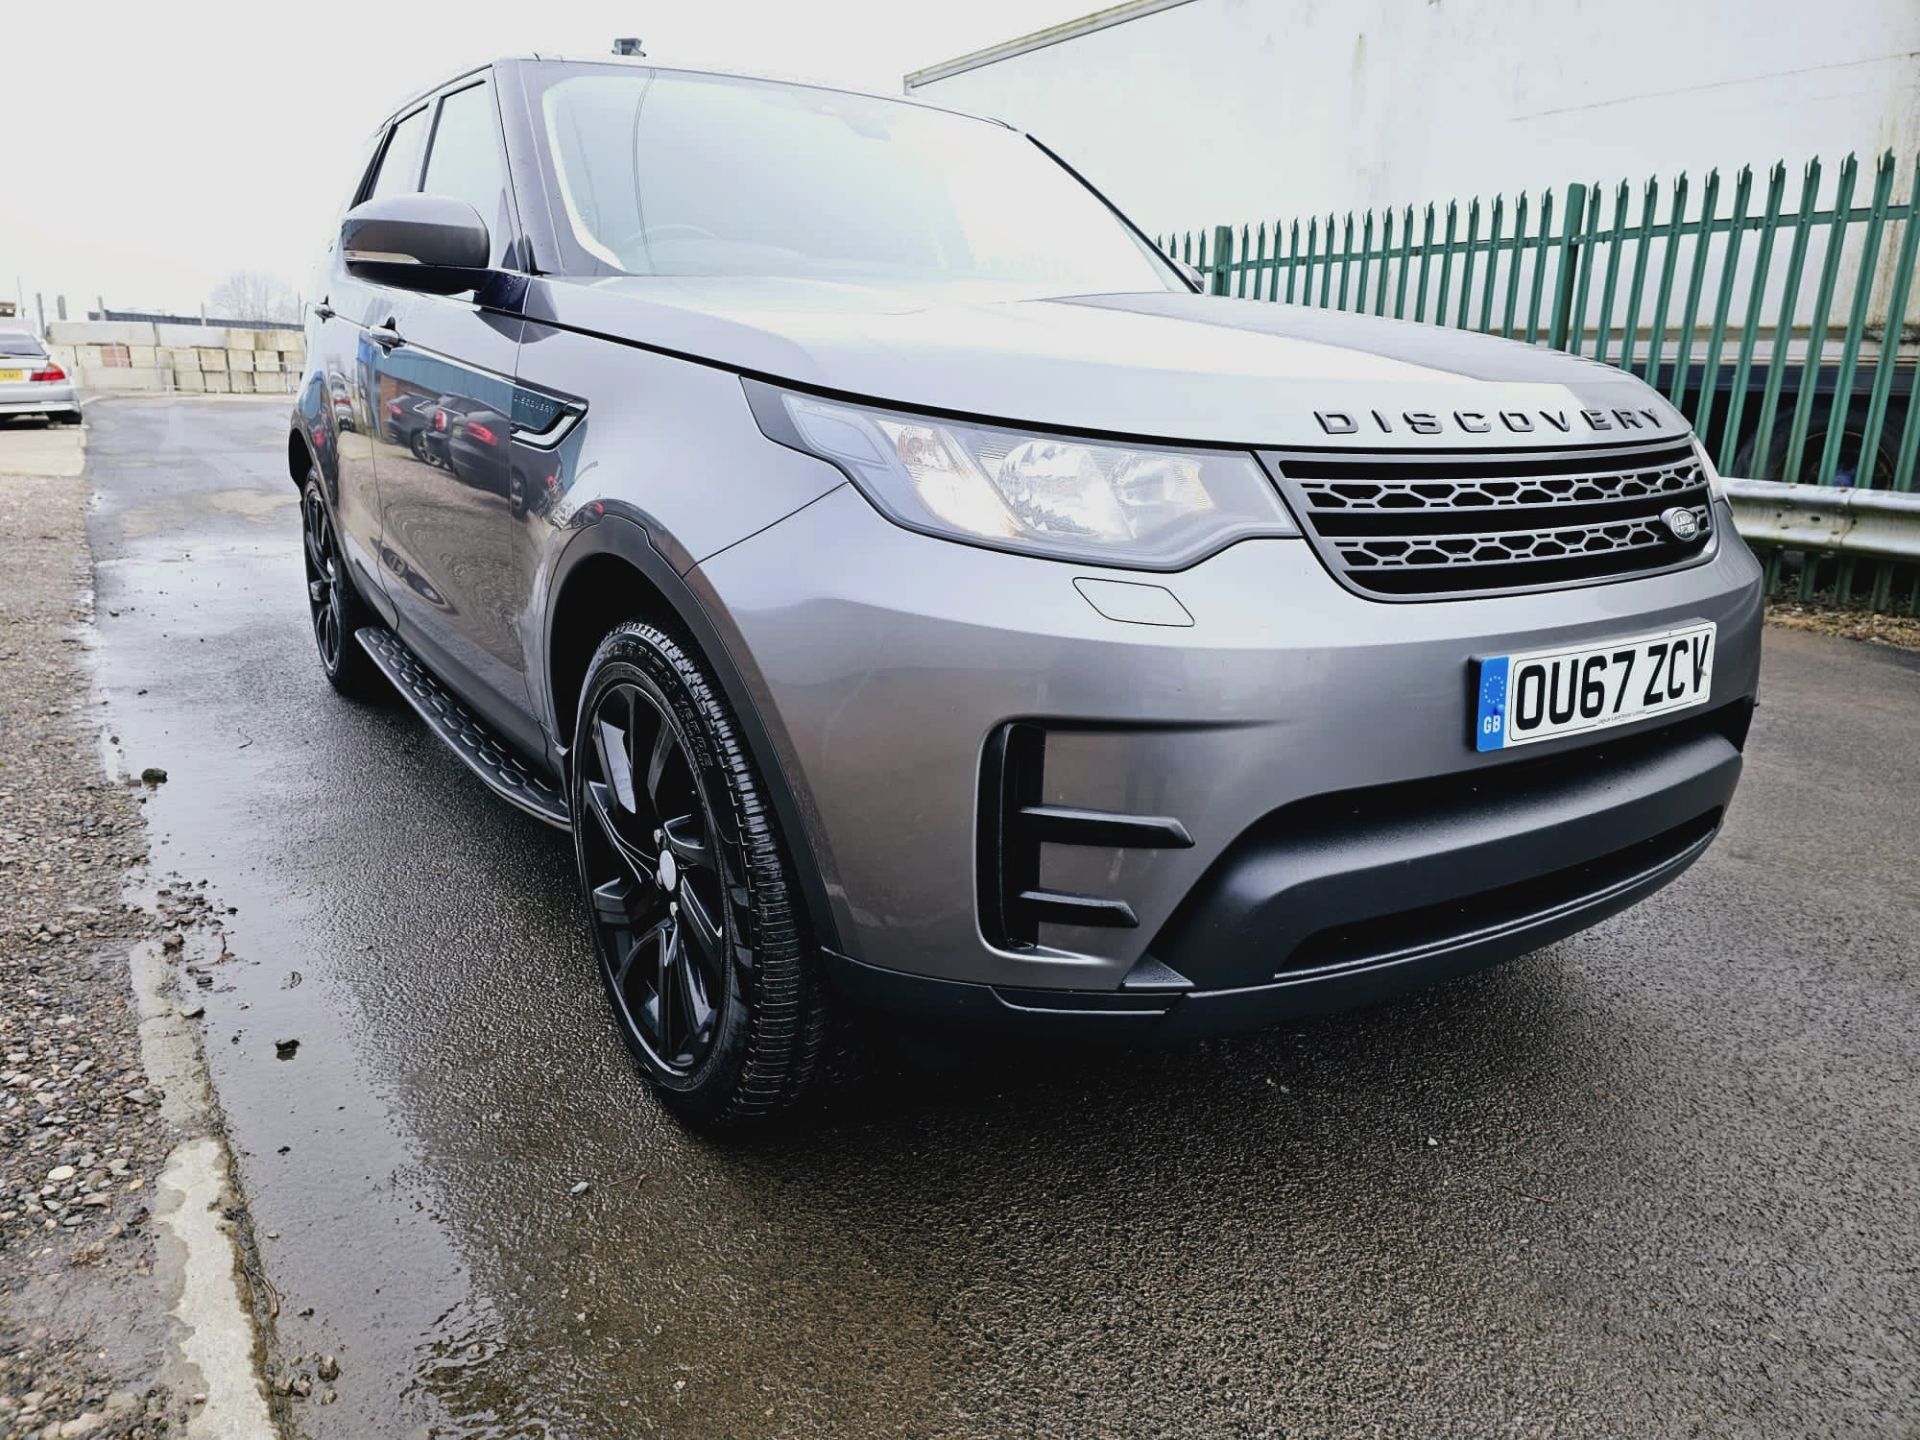 Land Rover Discovery 5 - (New Model) Diesel Auto - 2018 Model - Black Pack Edition - Sat Nav - Look - Image 4 of 45